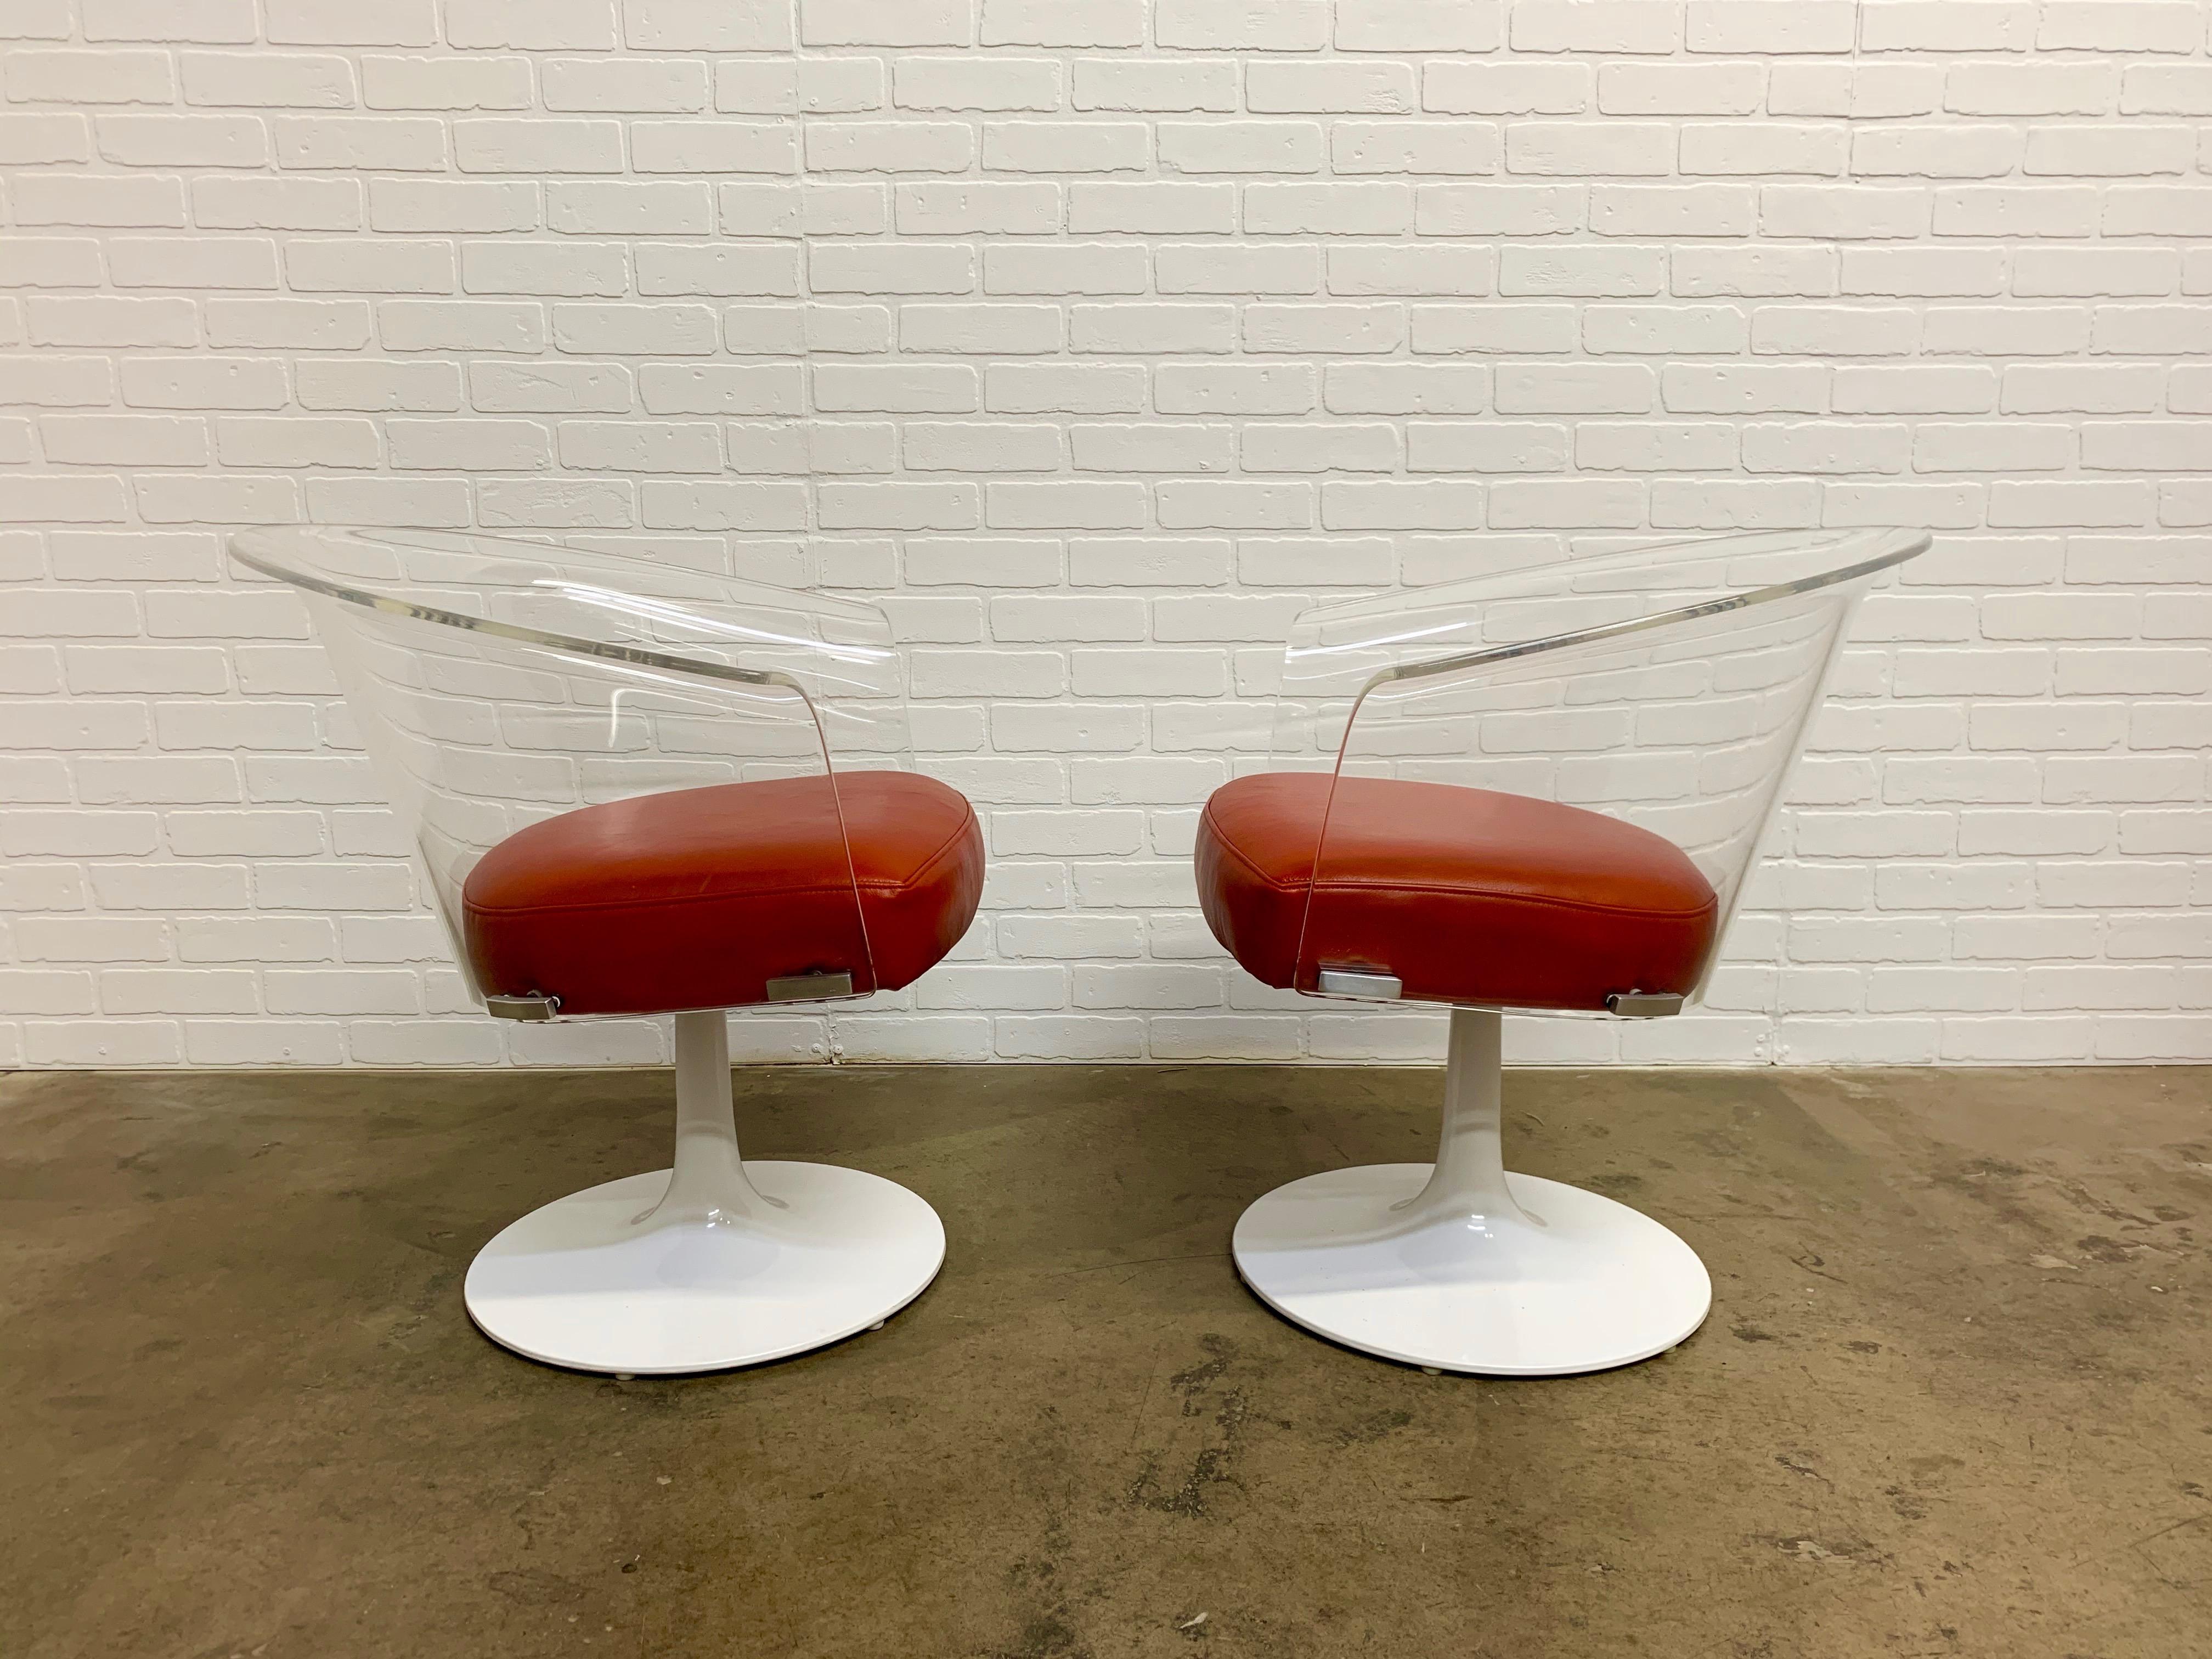 Lucite and Leather Space Age Chairs In Good Condition For Sale In Denton, TX